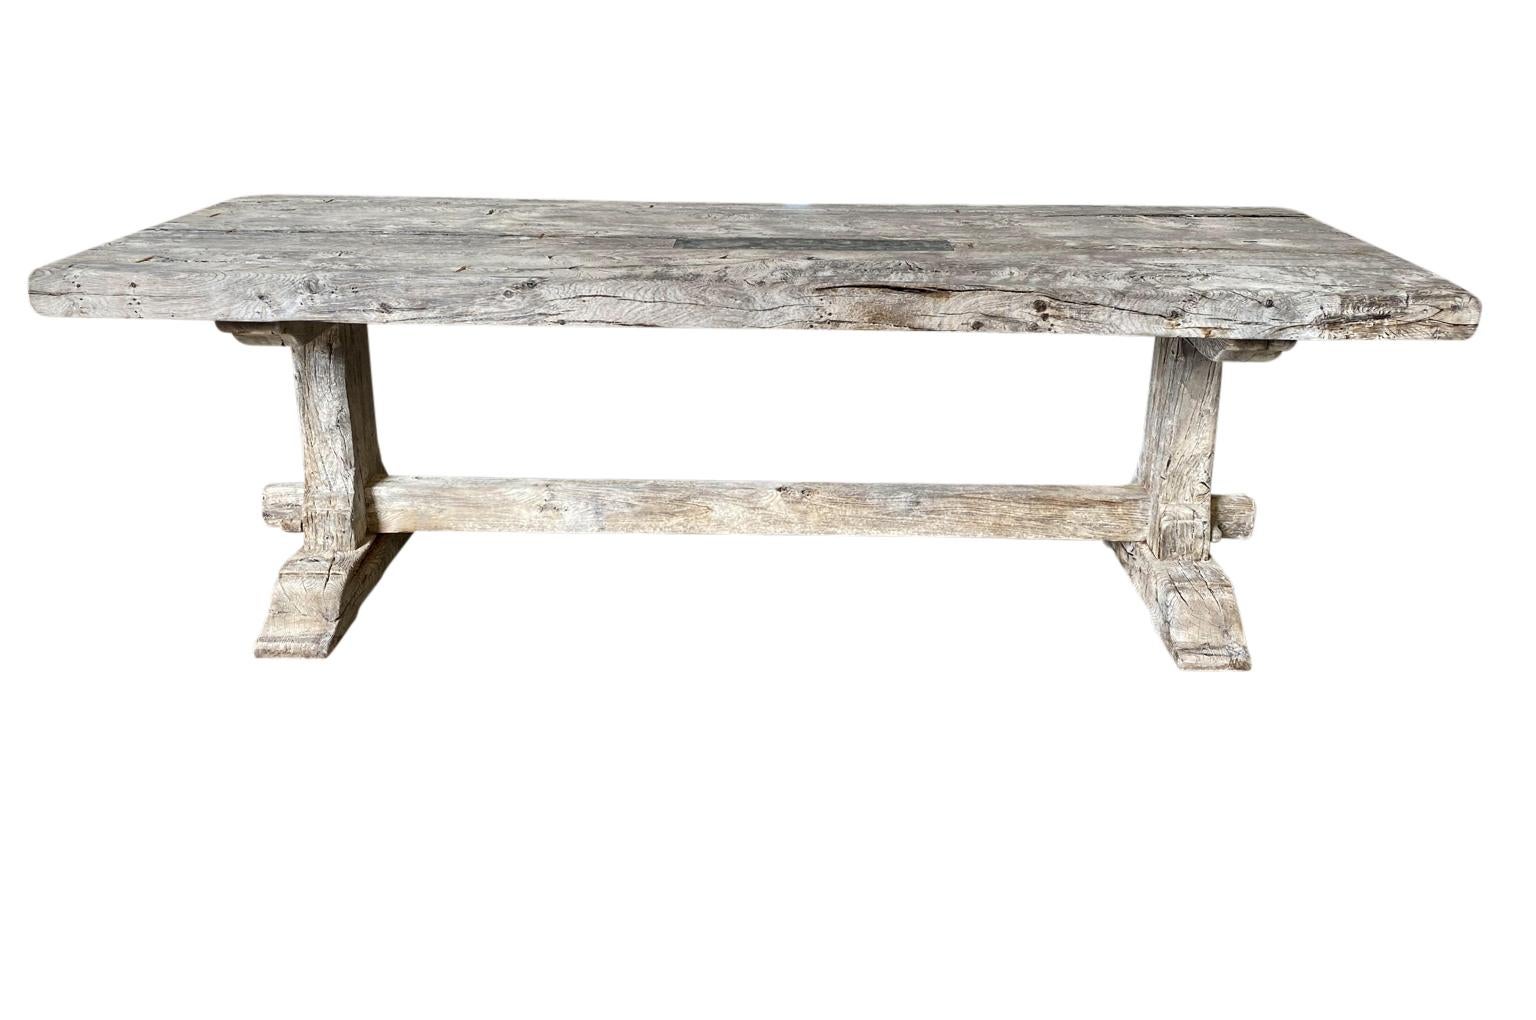 A very wonderful later 19th century farm table - trestle table from the Provence region of France. Soundly constructed from naturally washed oak. Stunning patina.